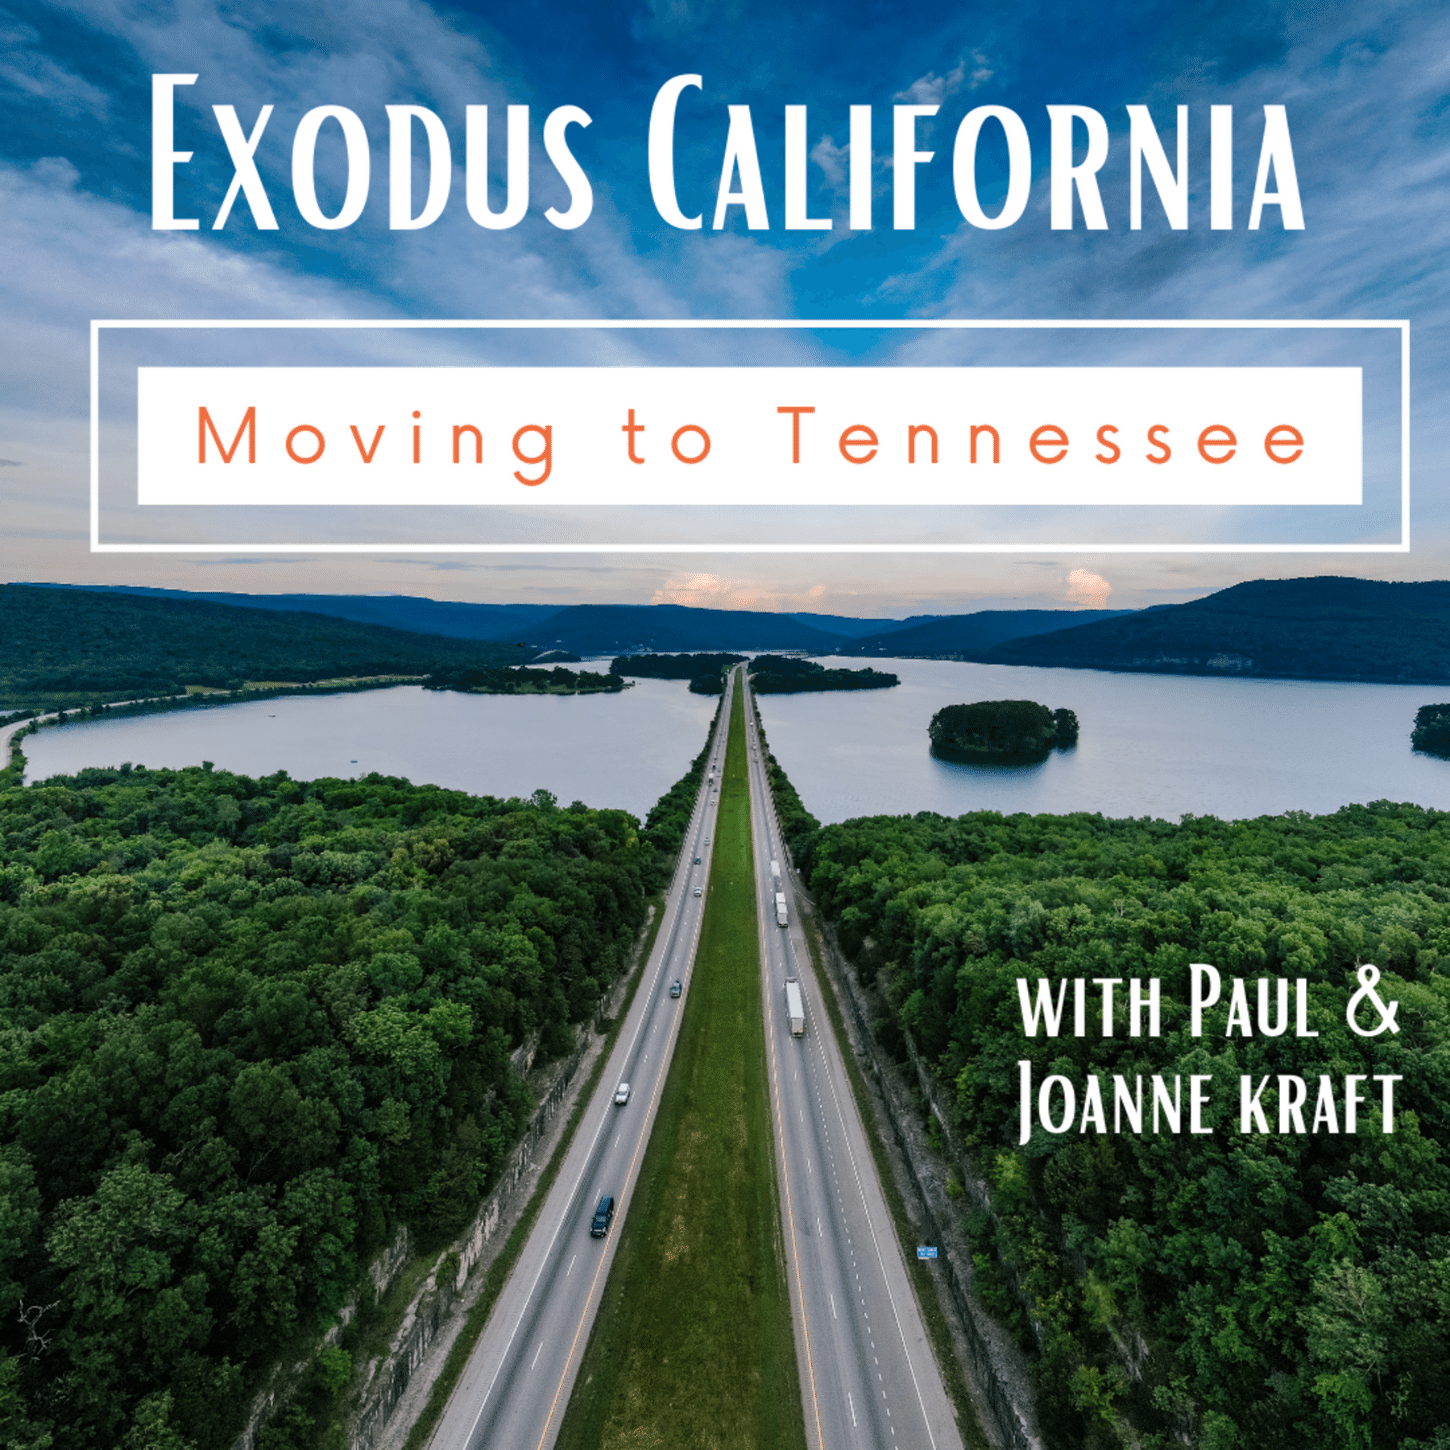 Exodus California - Moving to Tennessee